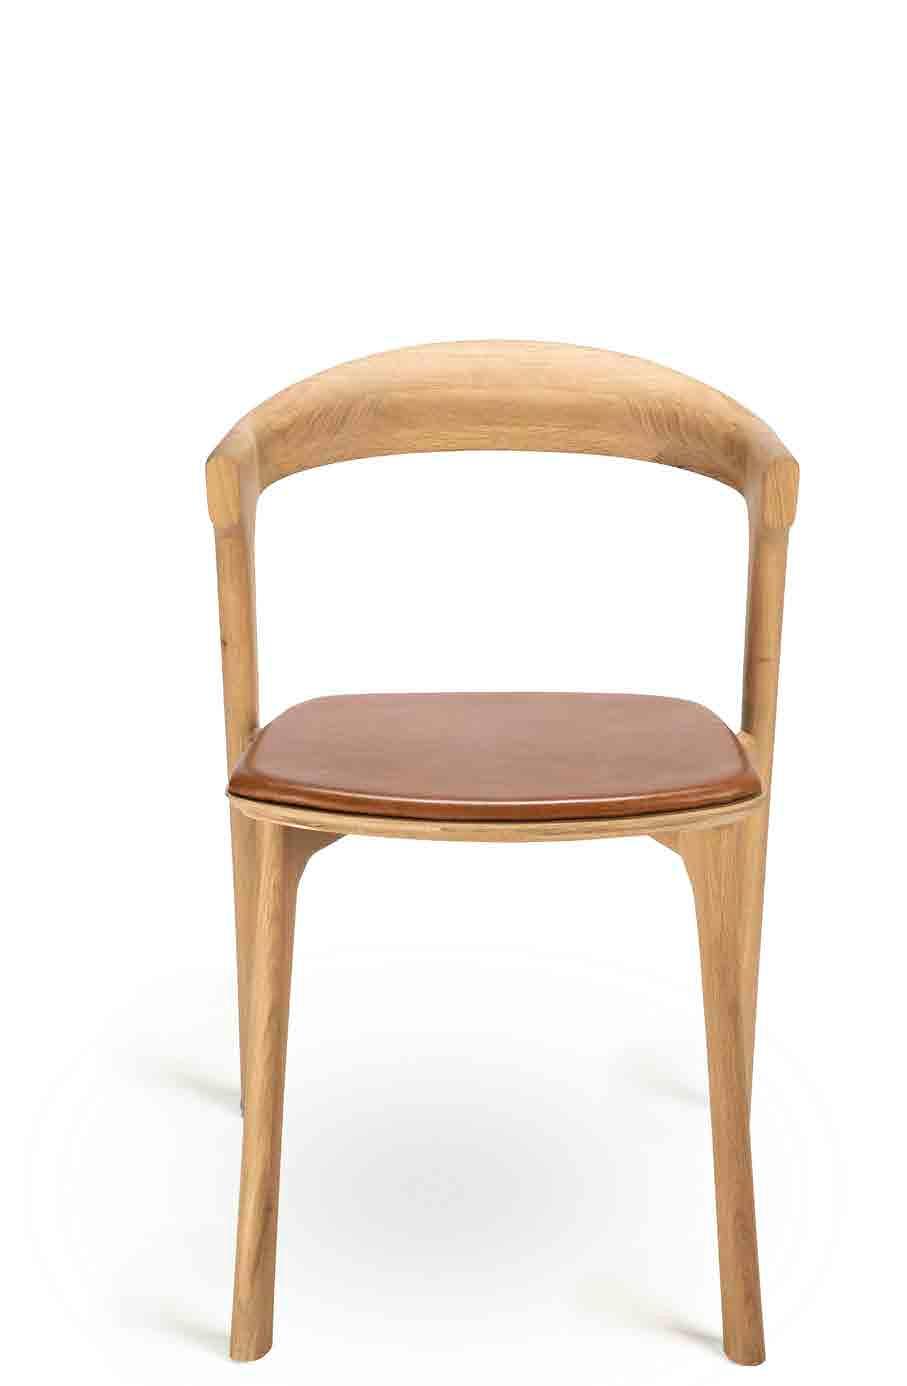 A SOFT TOUCH Over the years, the Bok chair has become one of